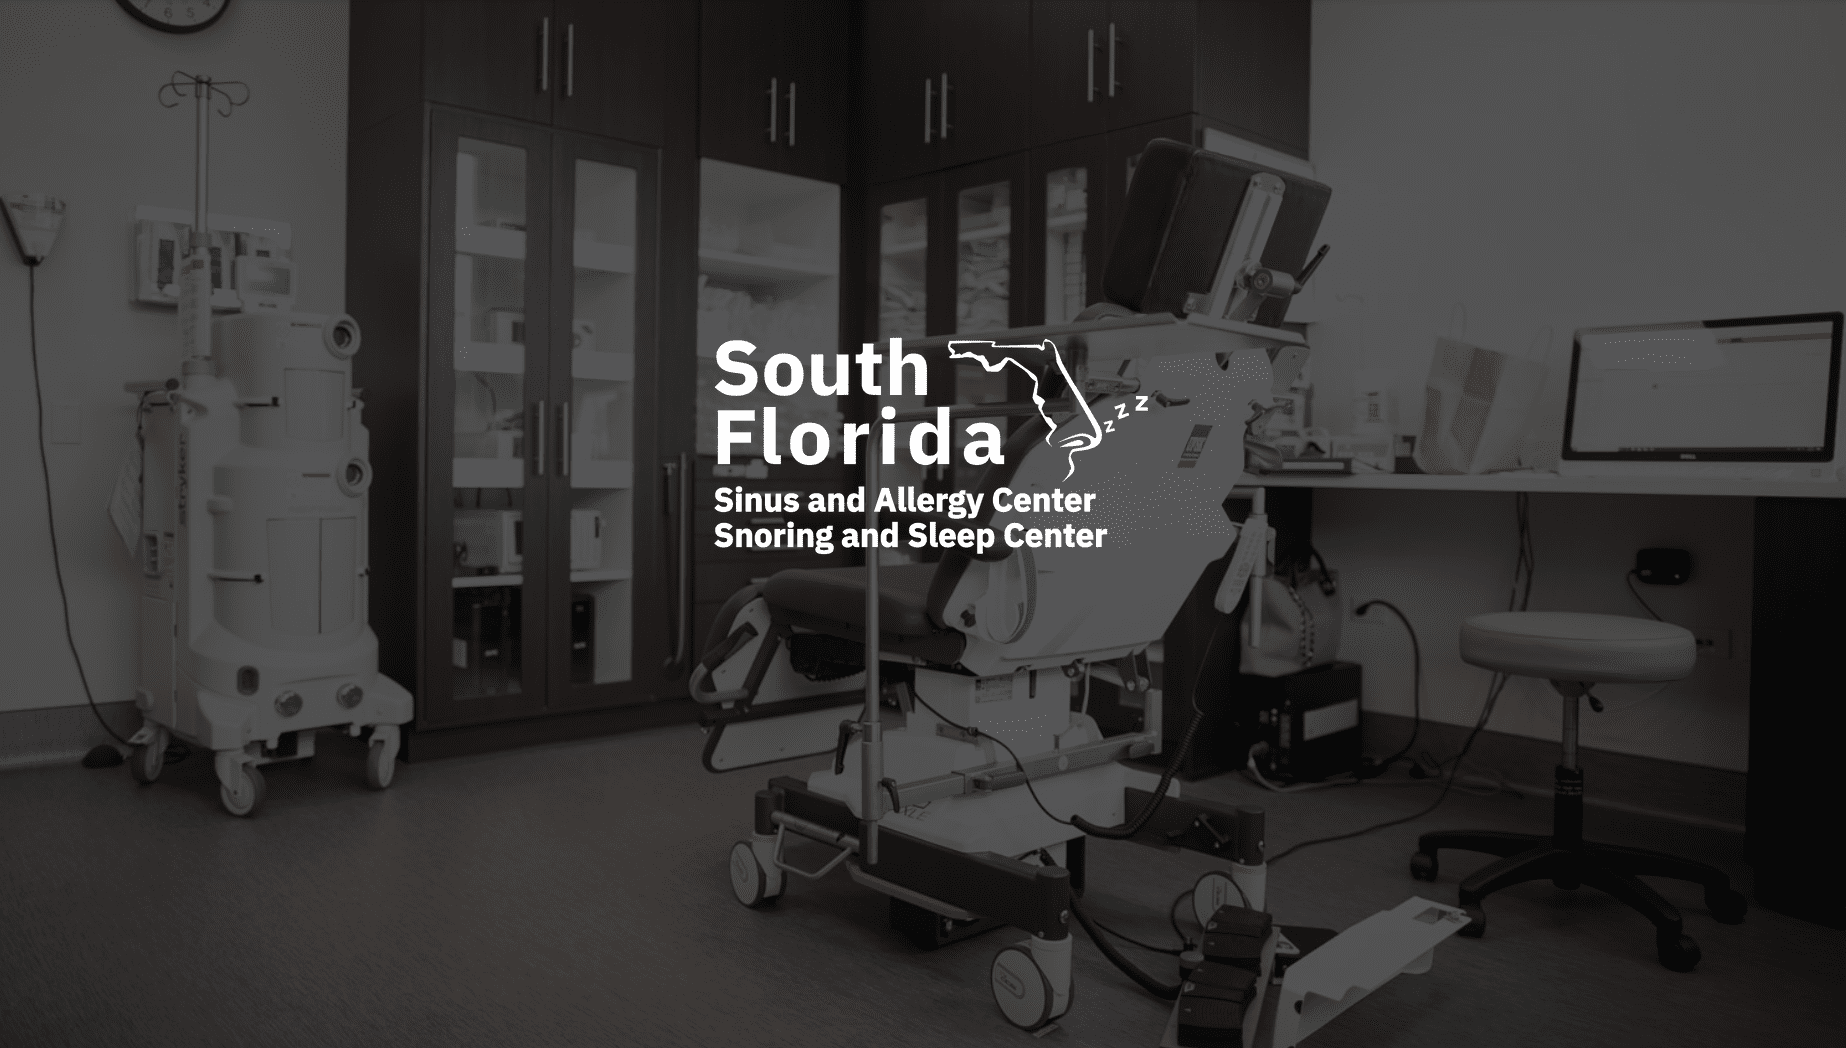 SFSAC White South Florida Sinus and Allergy Center Snoring and Sleep Center logo against a backdrop showing equipment in a doctor's office